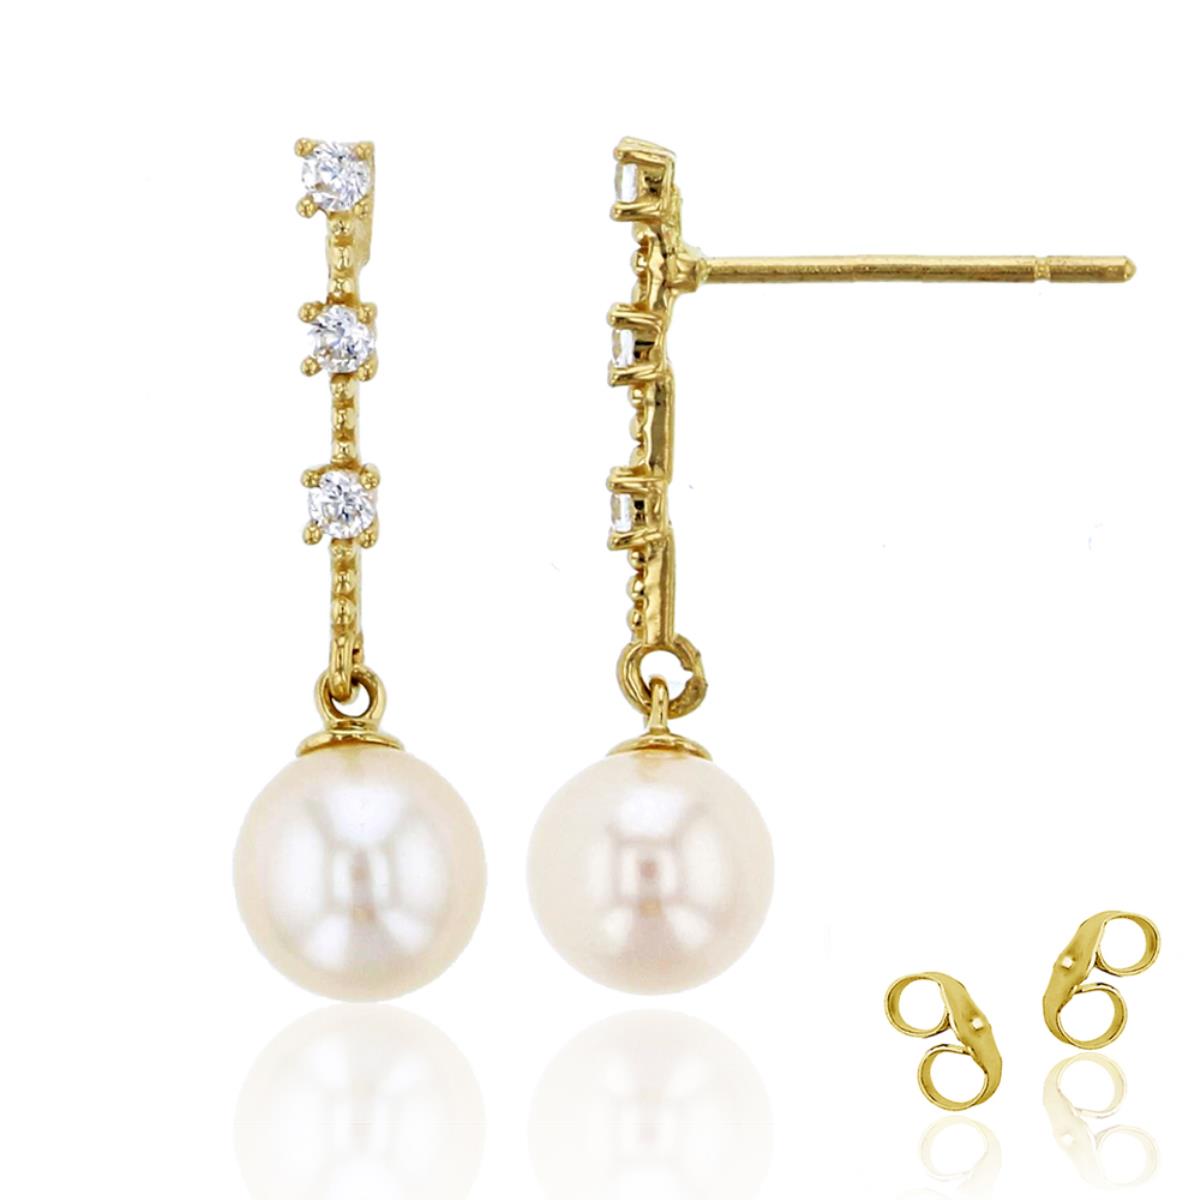 14K Yellow Gold Pave Dangling 5mm Fresh Water Pearl Drop Earring with 4.5mm Clutch